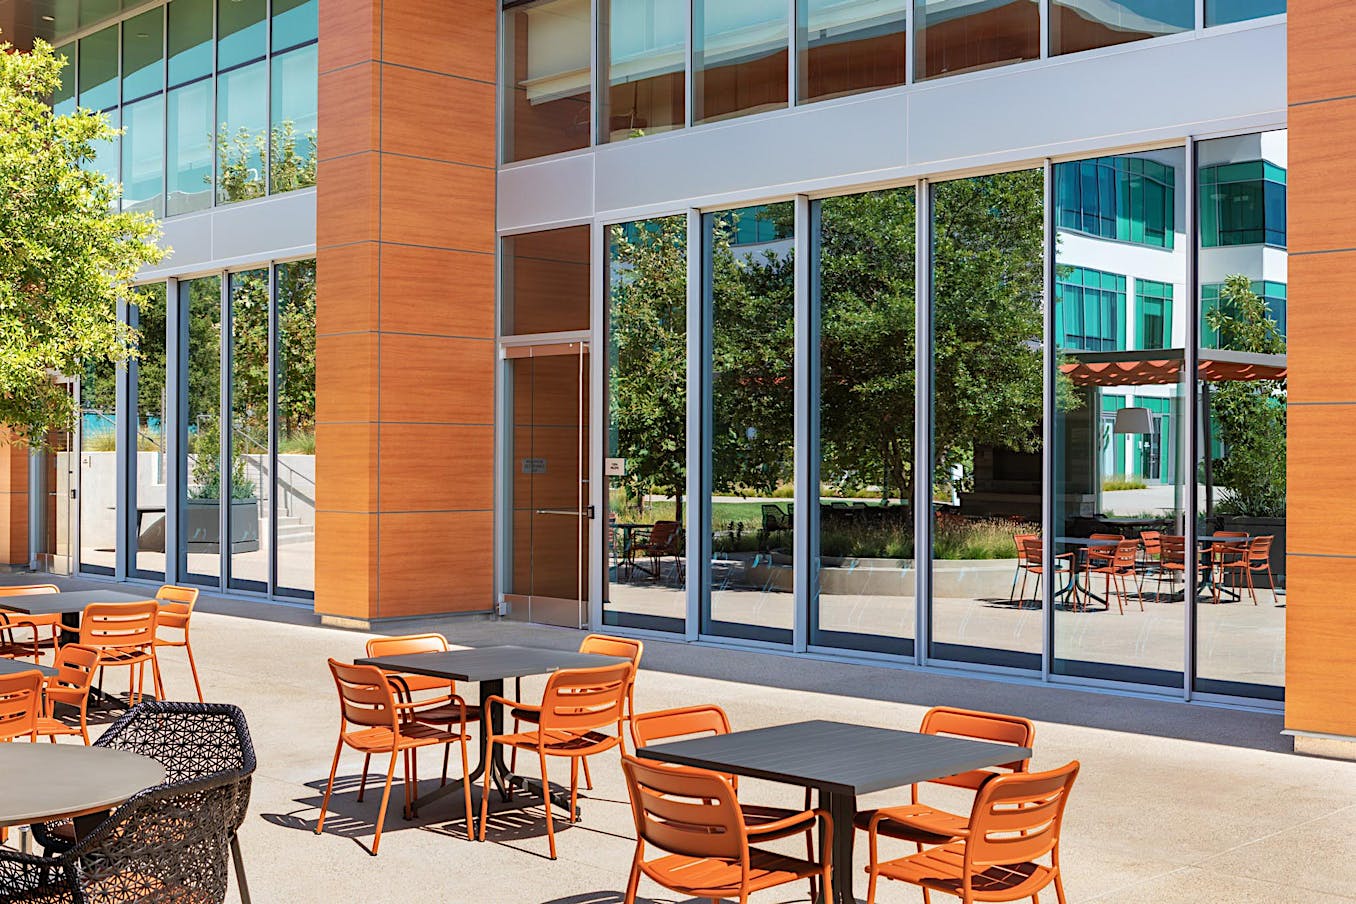 Outdoor seating area with closed sliding doors at a modern office building on a sunny day